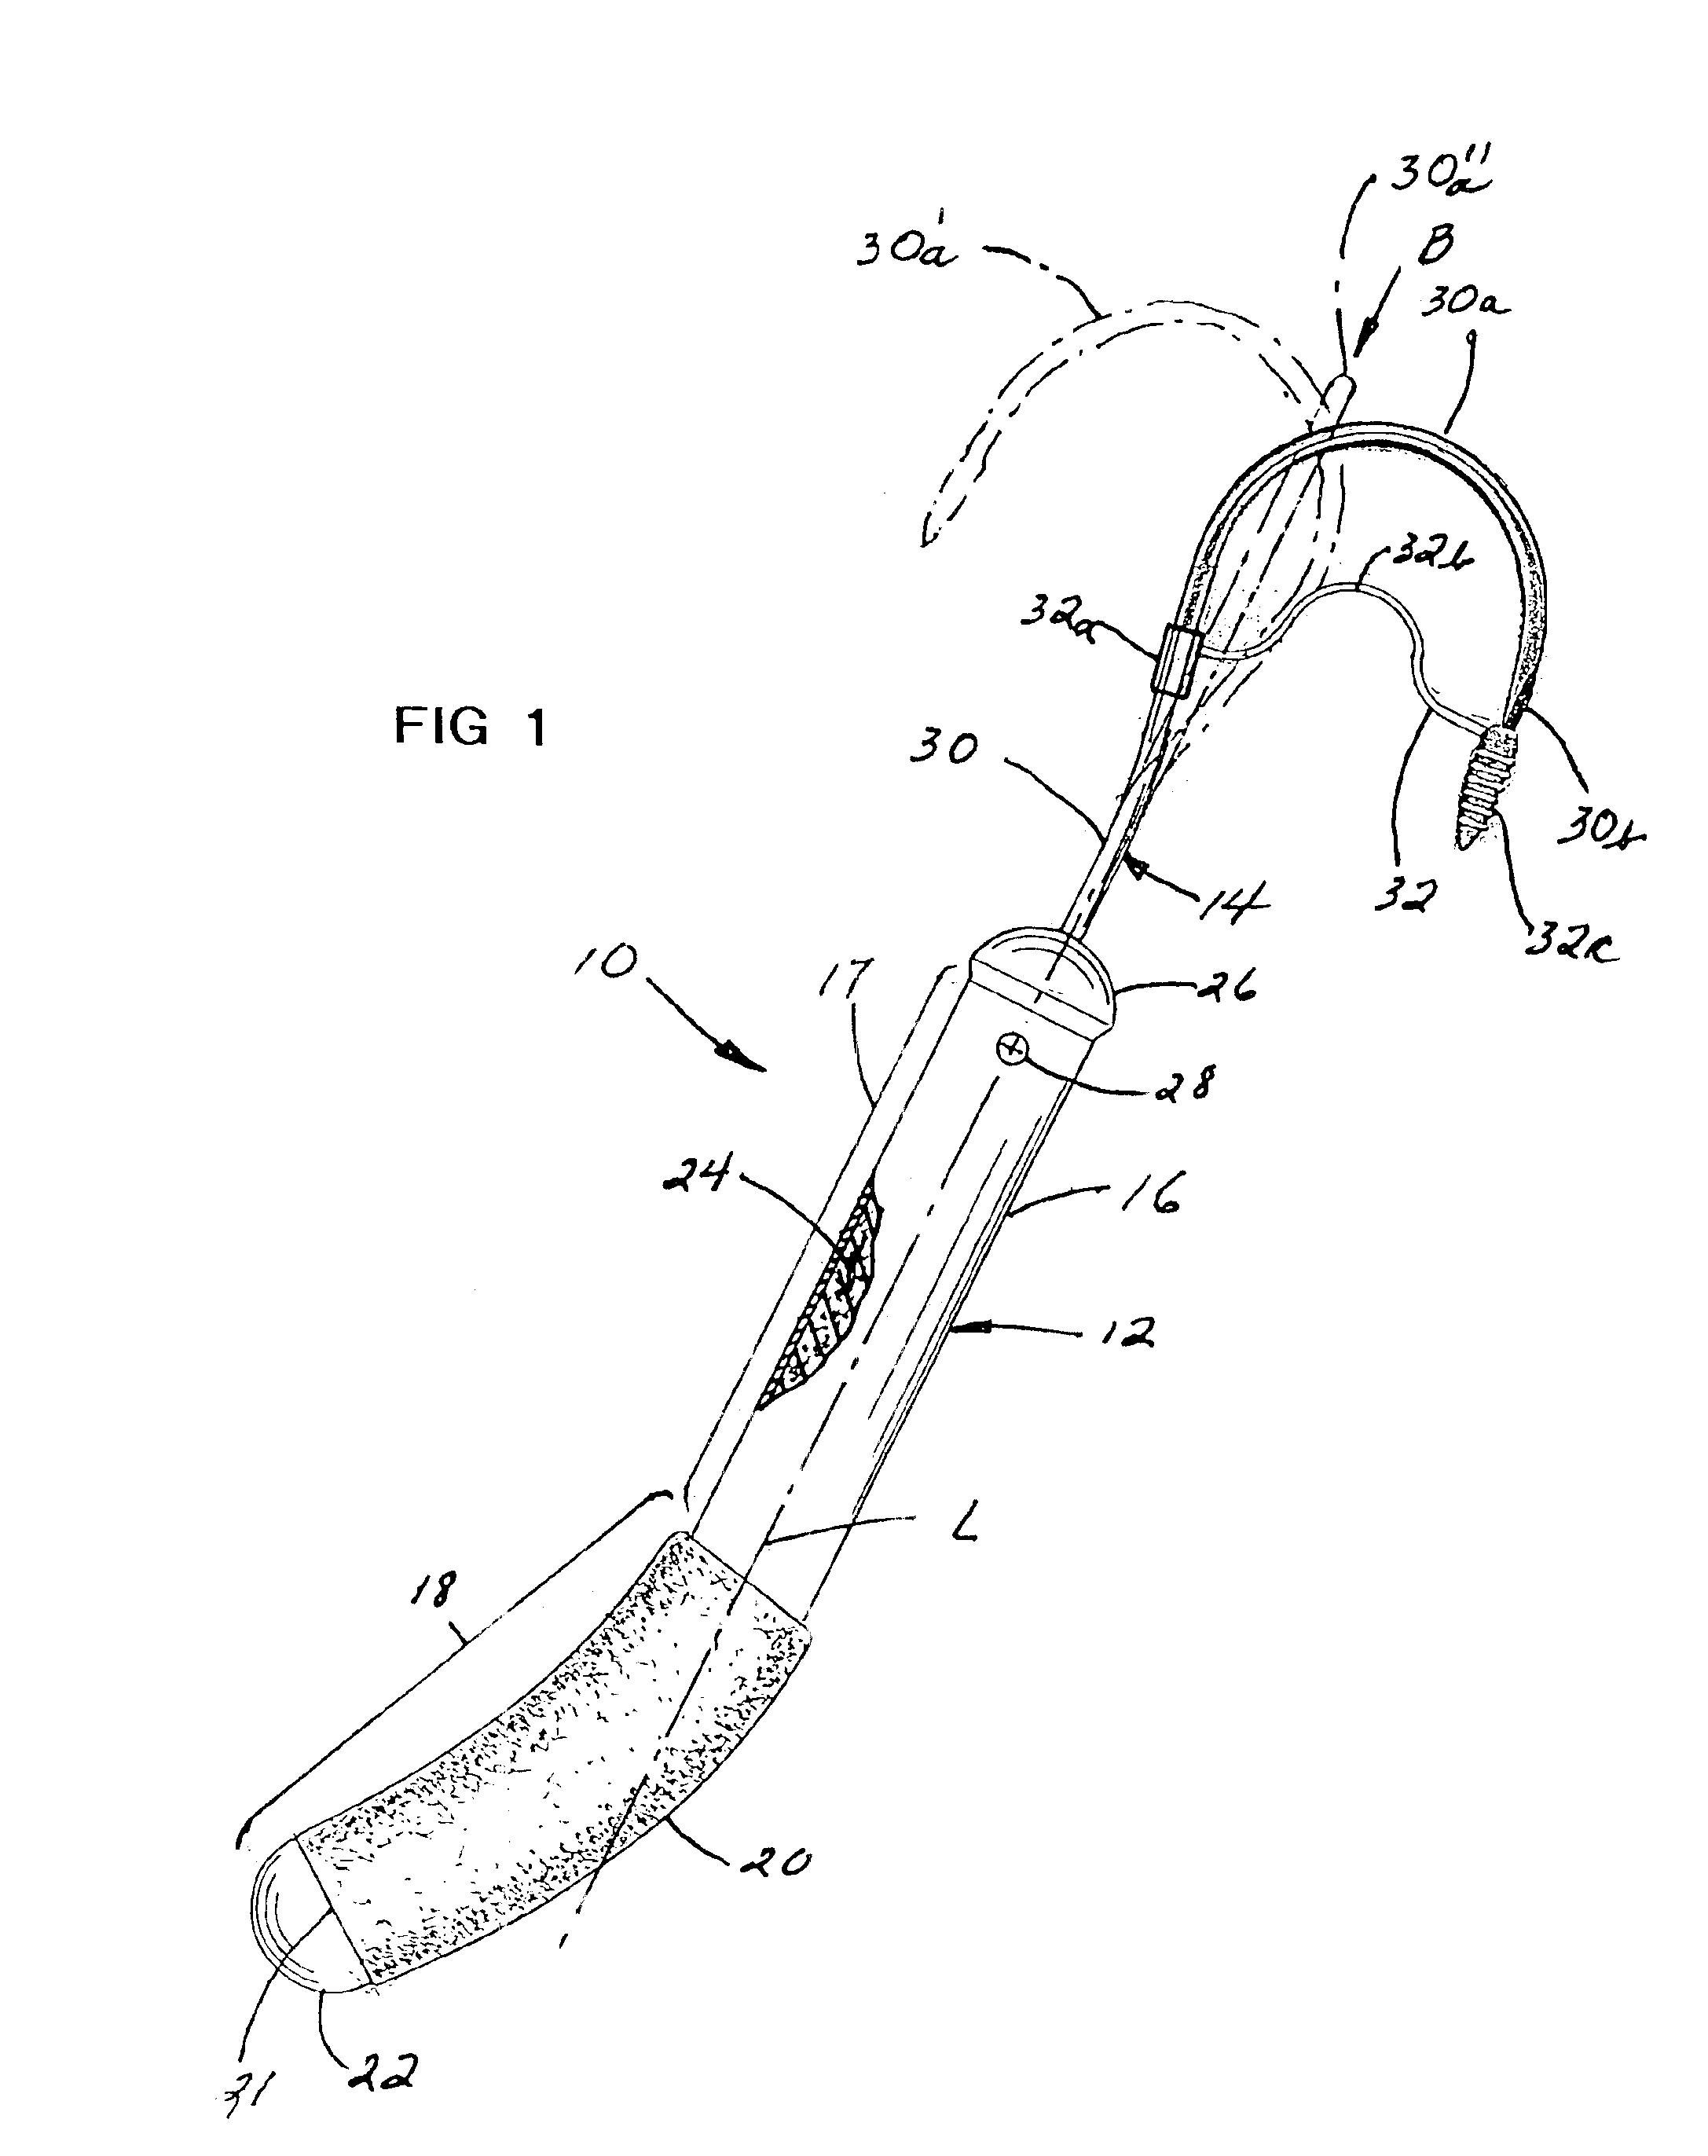 Fishing gaff with multi-position fish hook